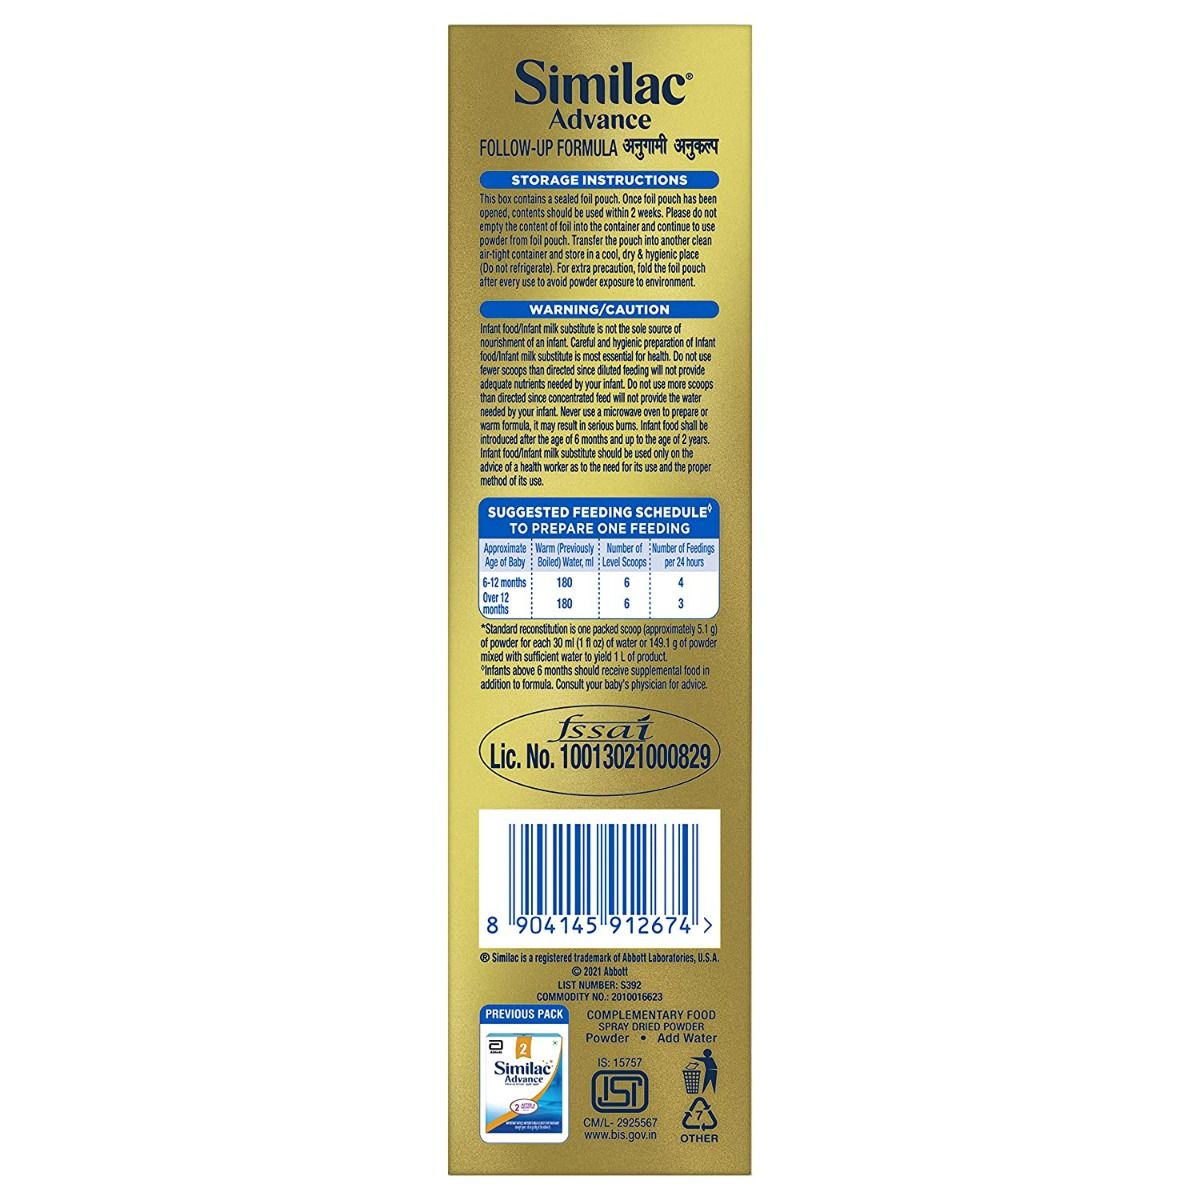 Similac Advance Follow-Up Formula Stage 2, After 6 Months, 400 gm Refill Pack, Pack of 1 